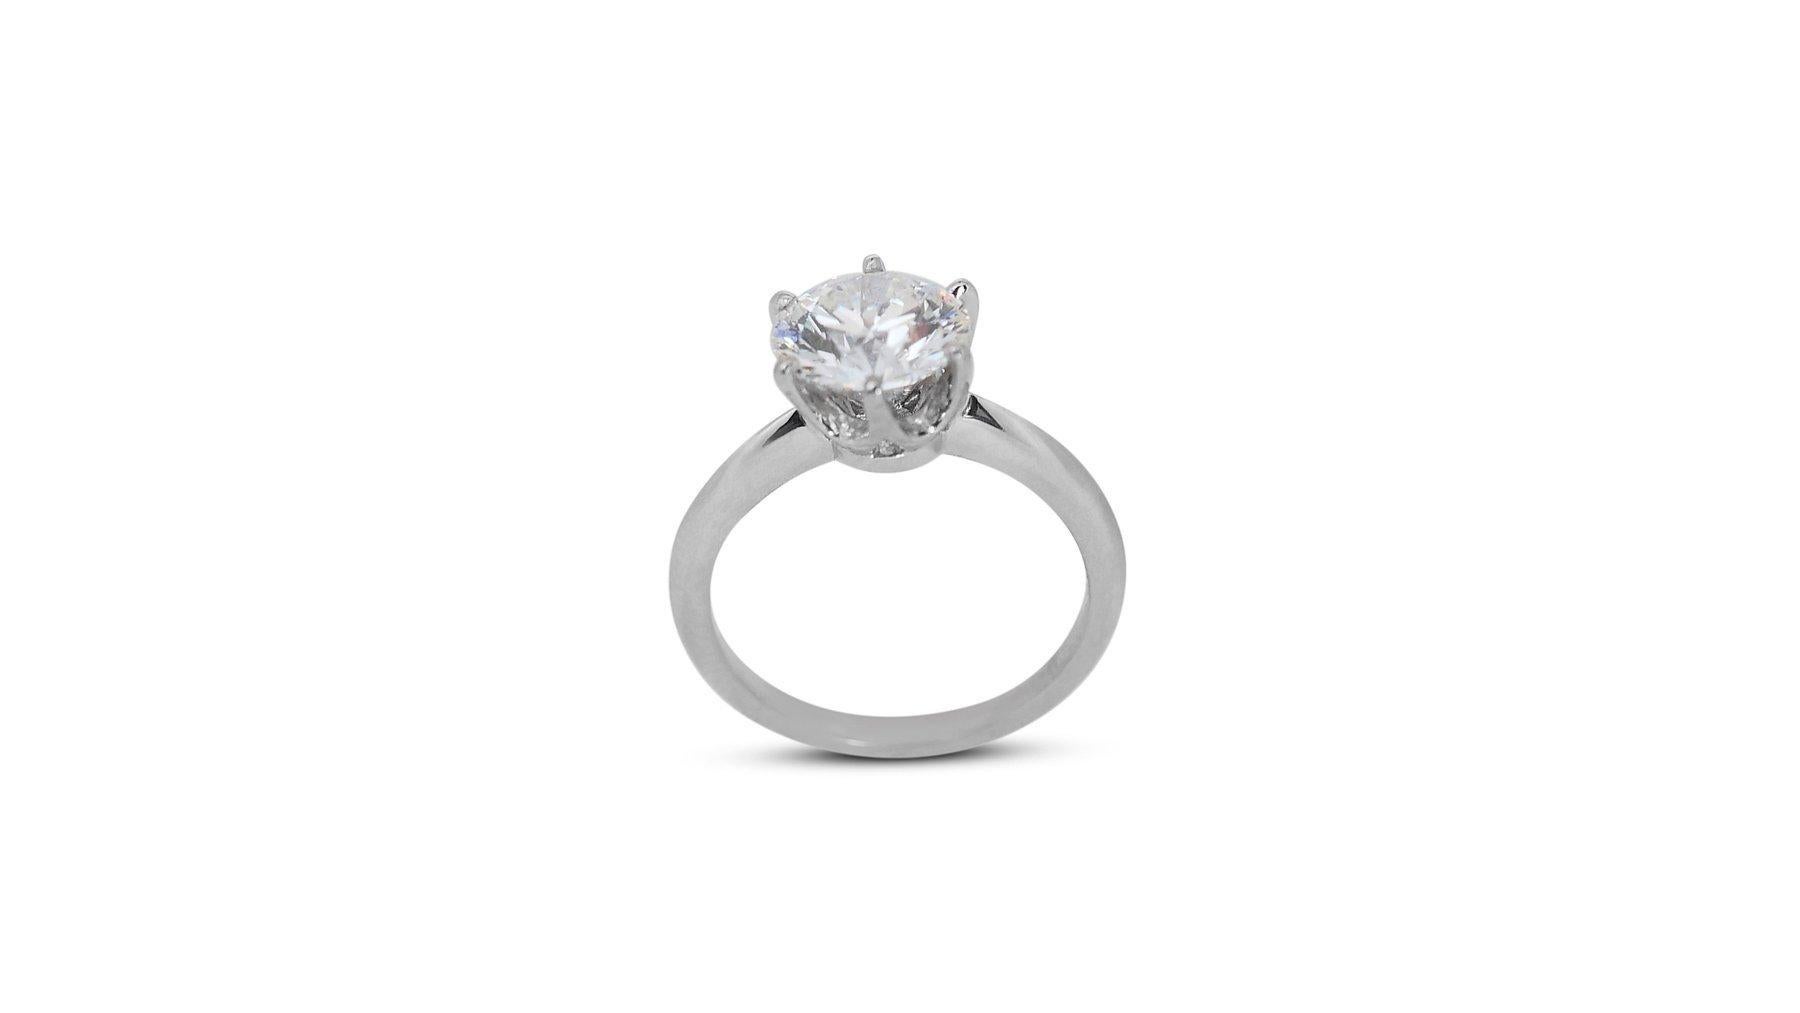 Timeless 3.09ct Diamond Solitaire Ring in 18k White Gold - GIA Certified (bague solitaire en or blanc 18 carats) en vente 1